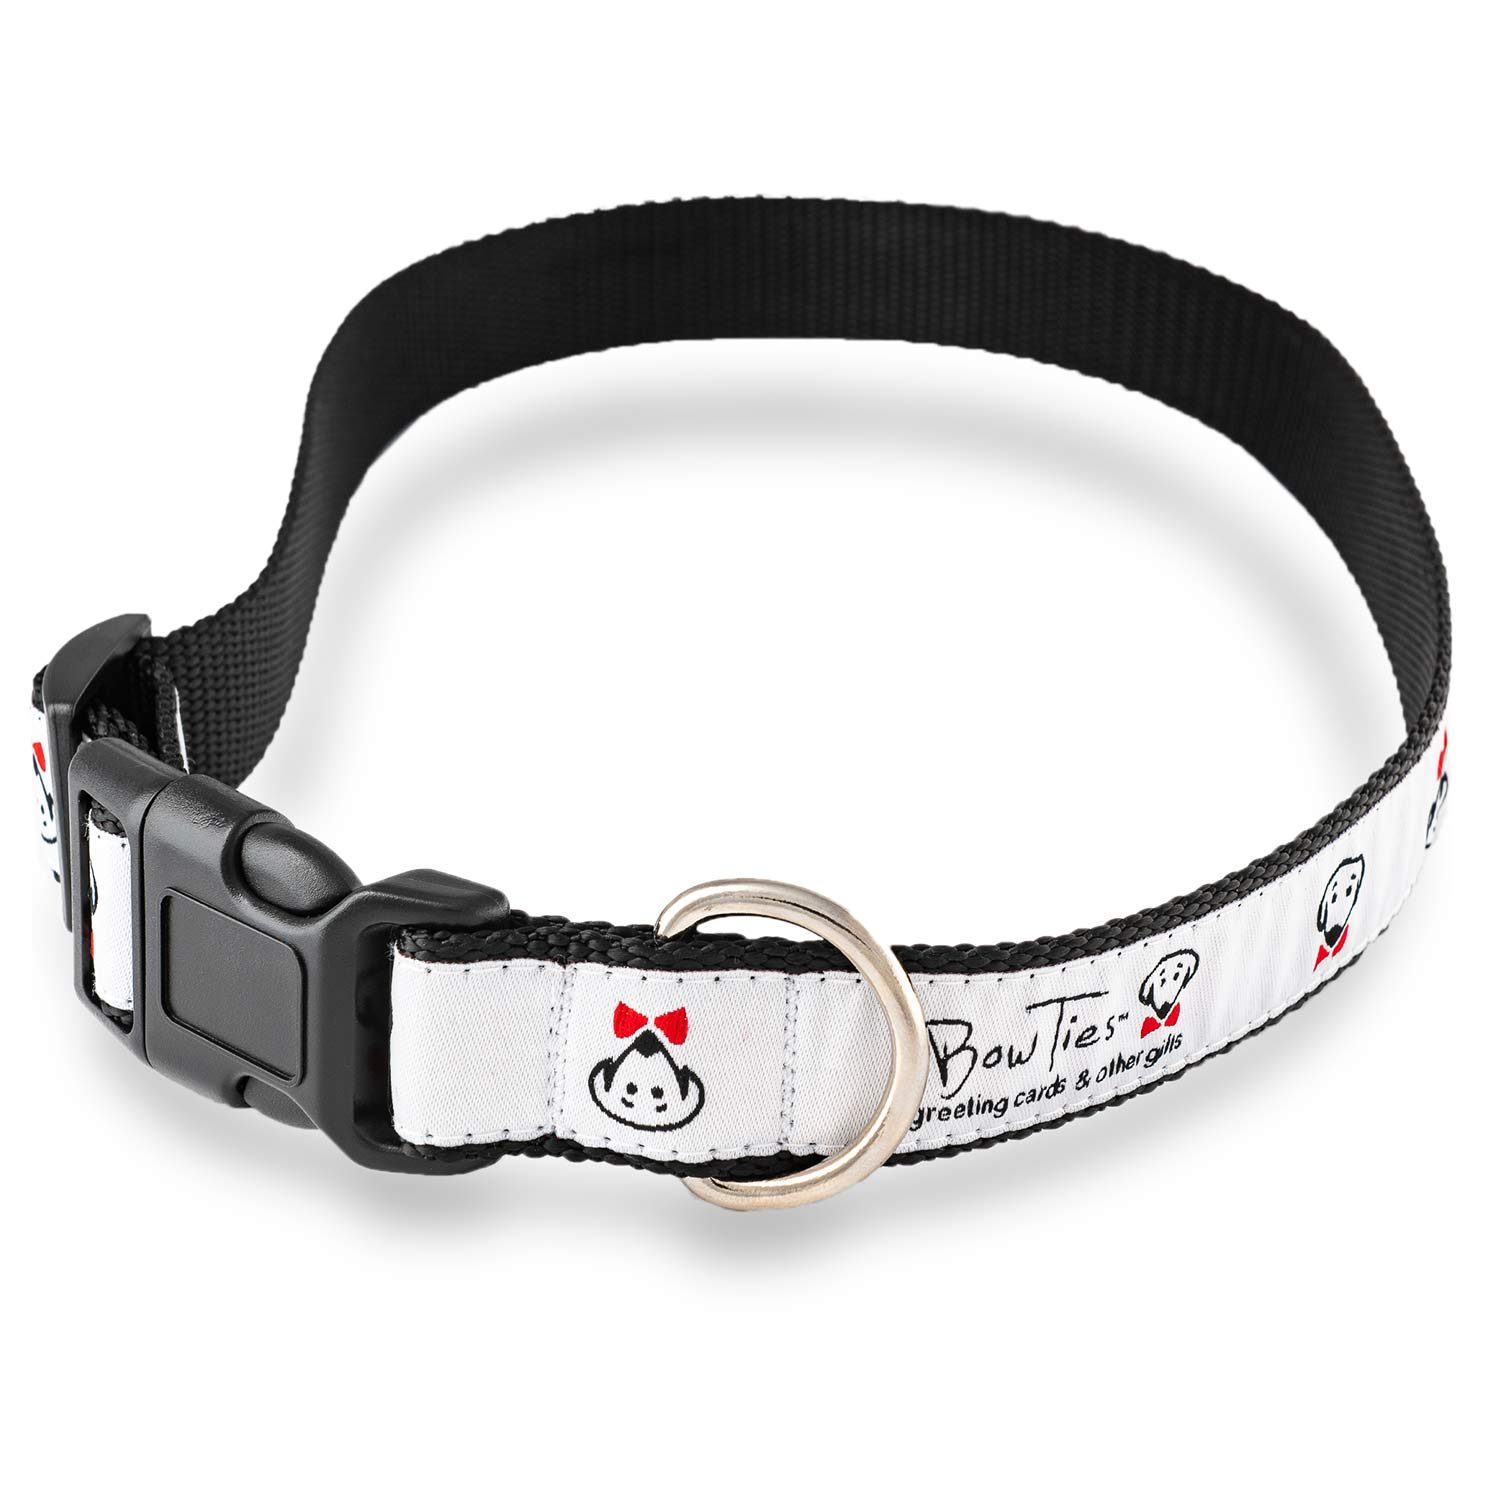 Pet Collar by Beau Tyler in Large size